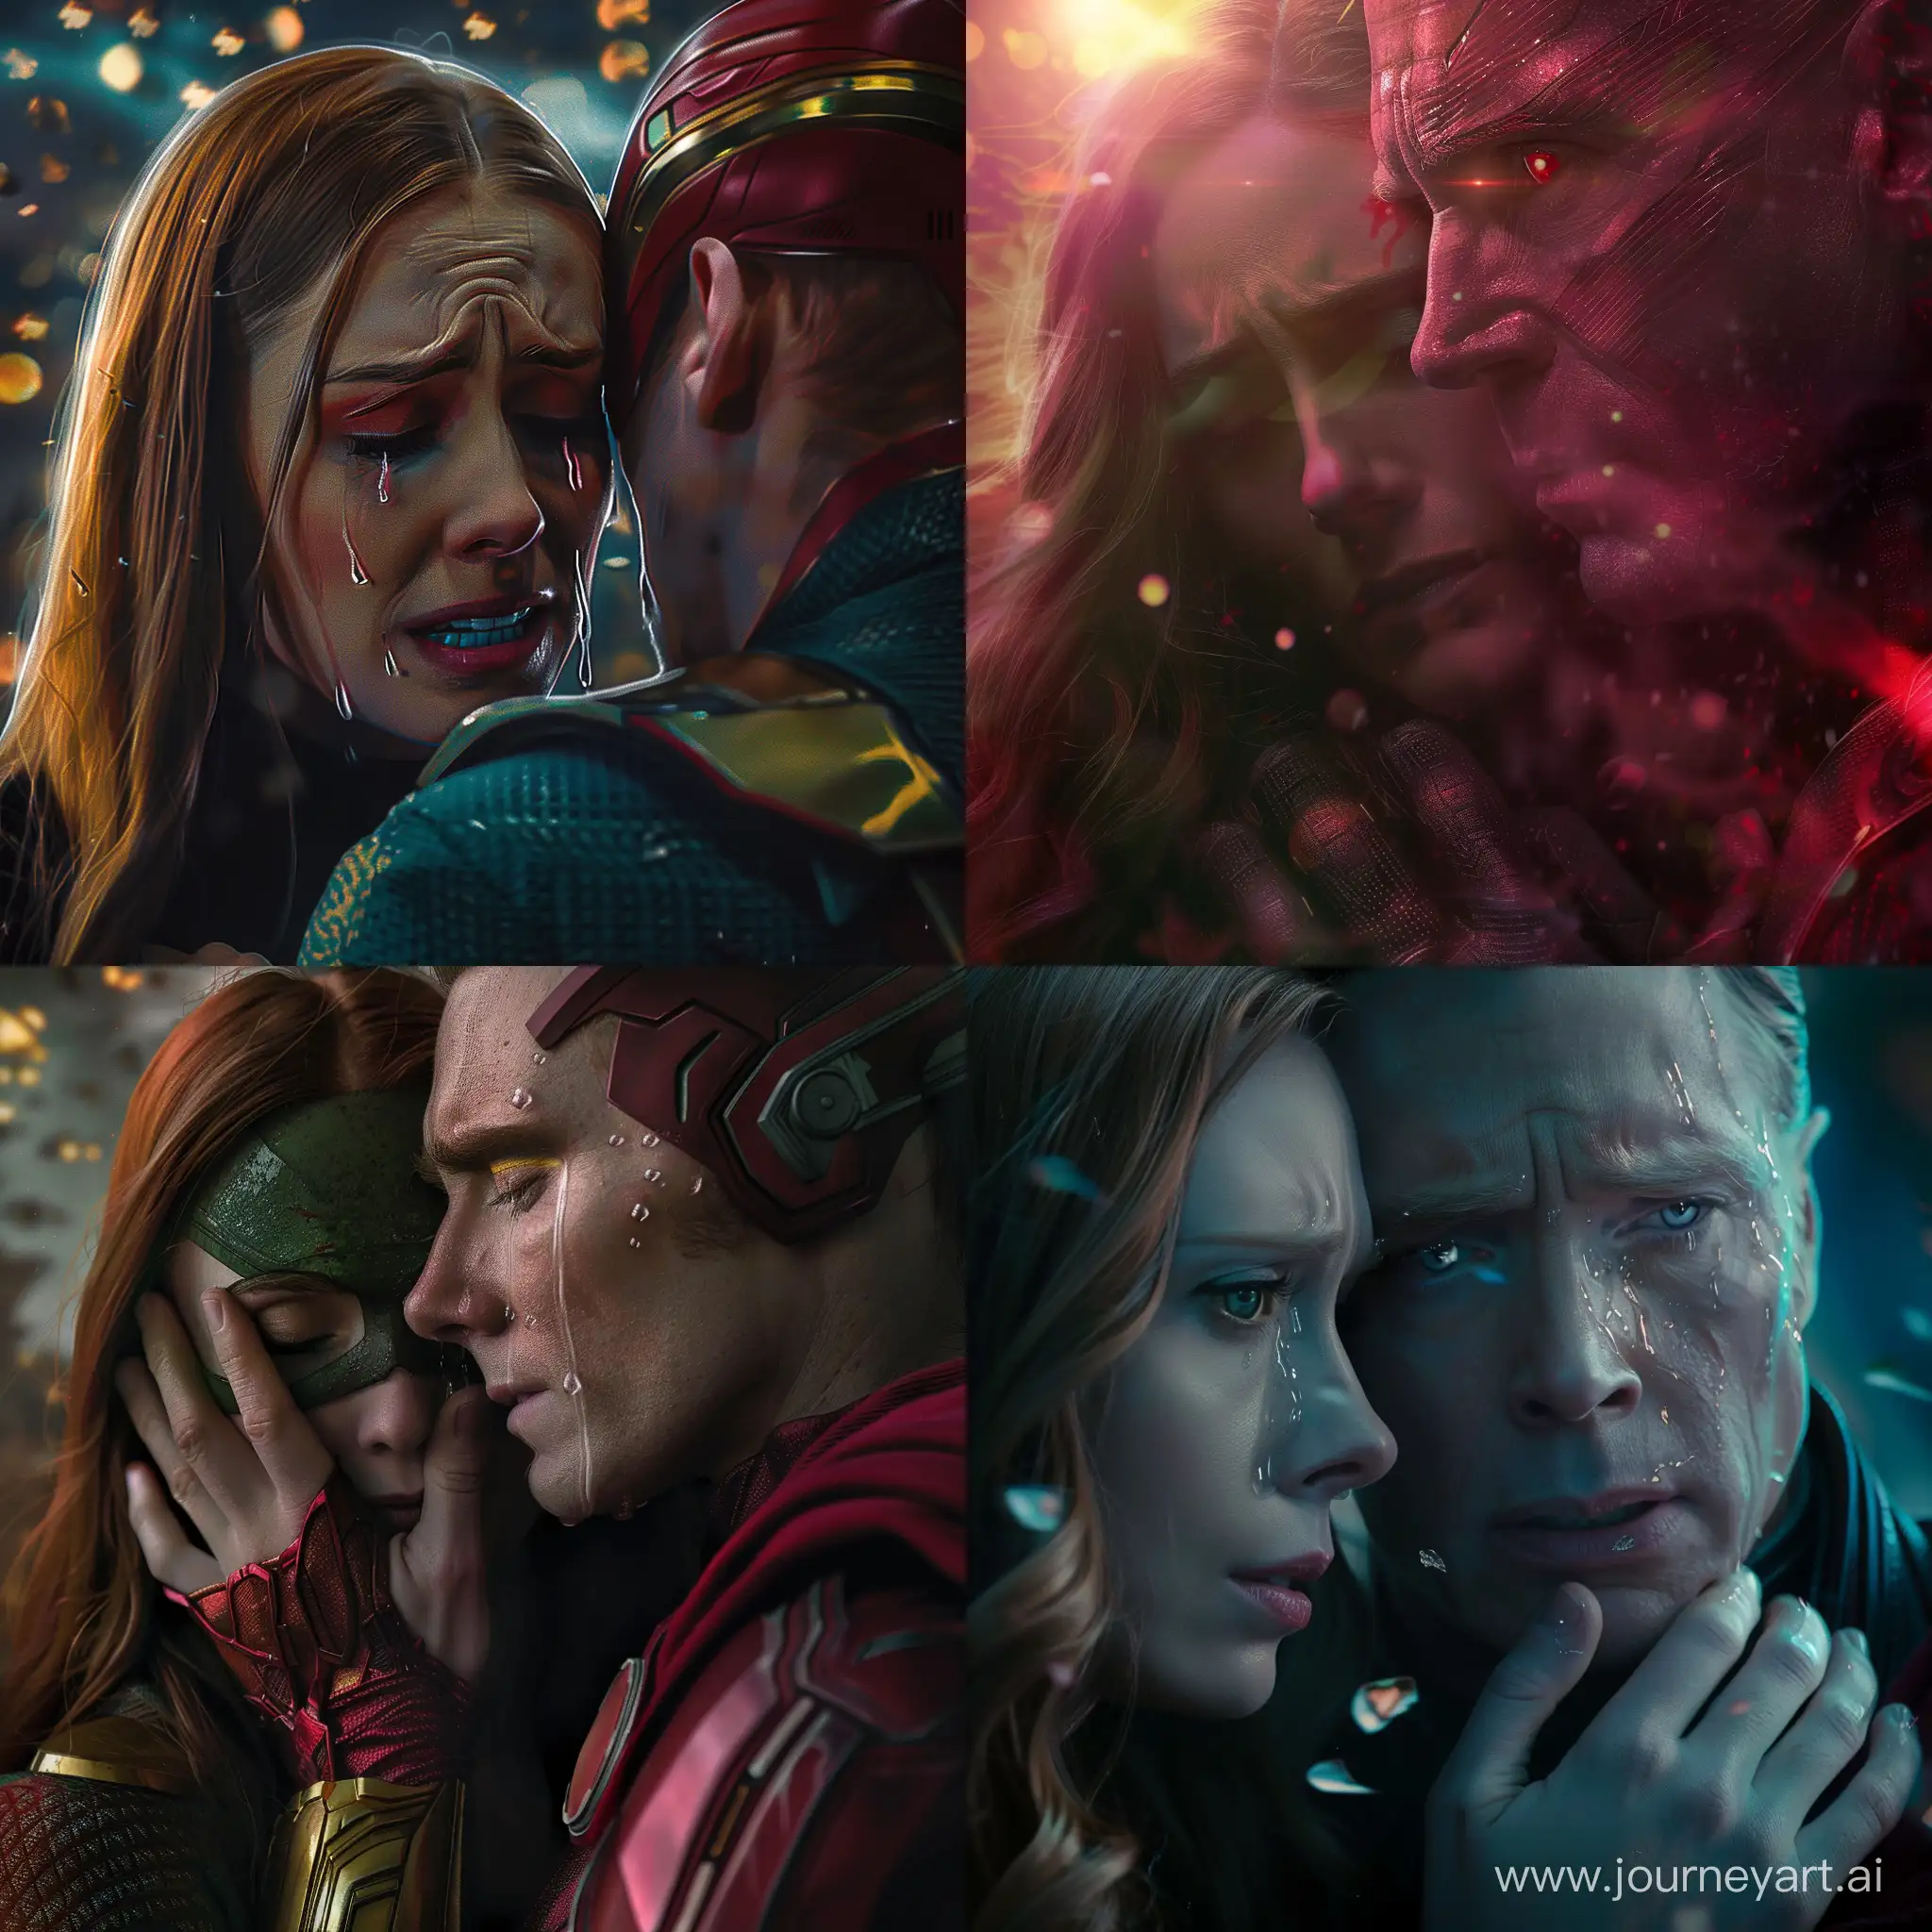 Wanda-Maximoff-and-Vision-Embrace-in-Tears-of-Joy